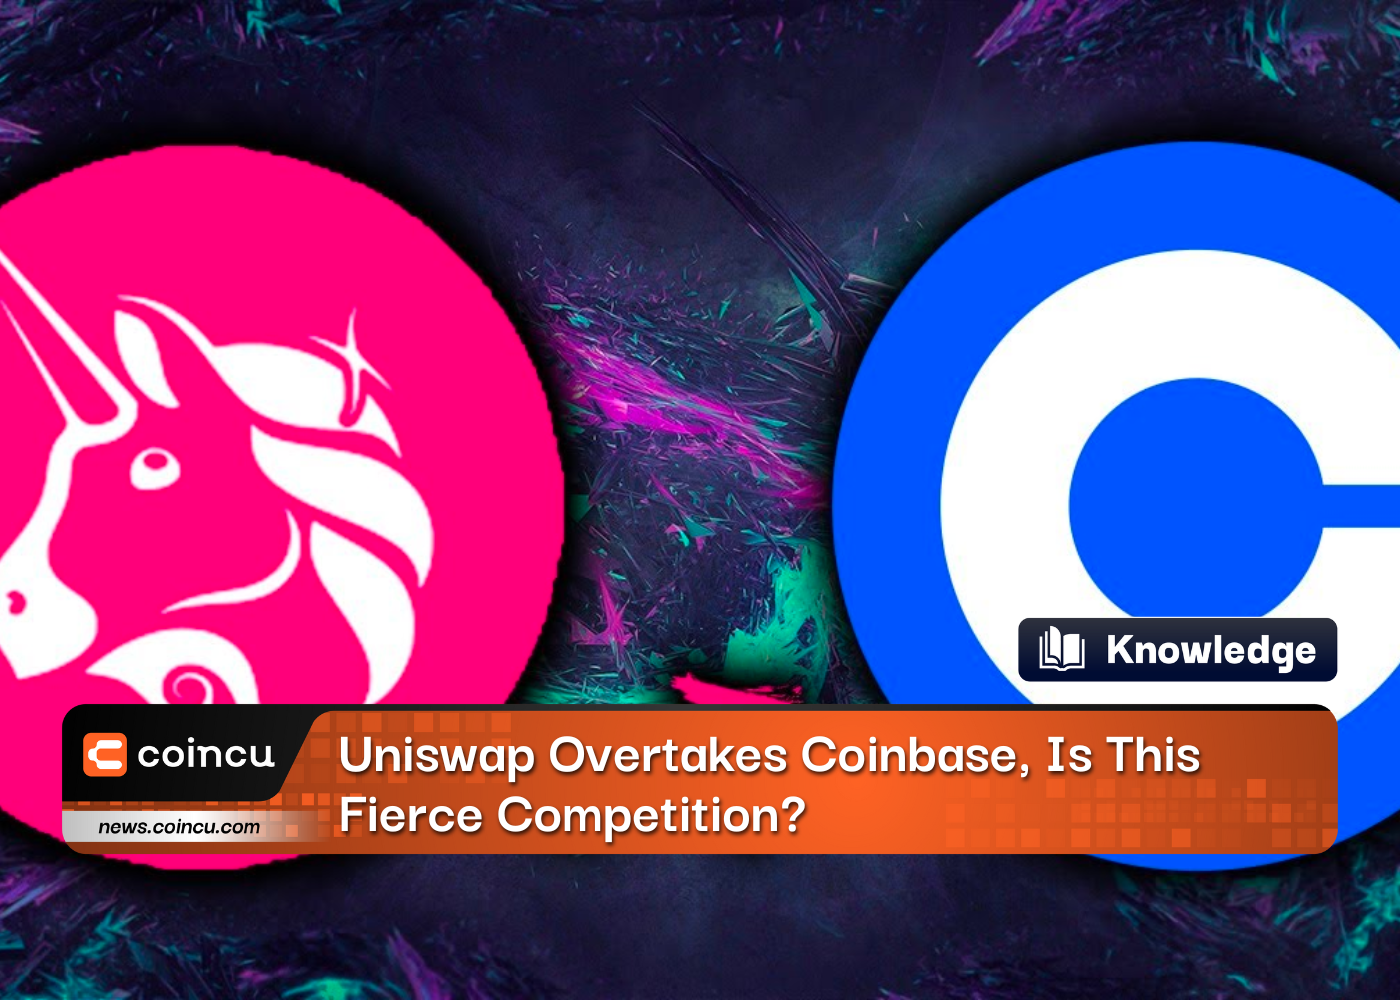 Uniswap Overtakes Coinbase, Is This Fierce Competition?